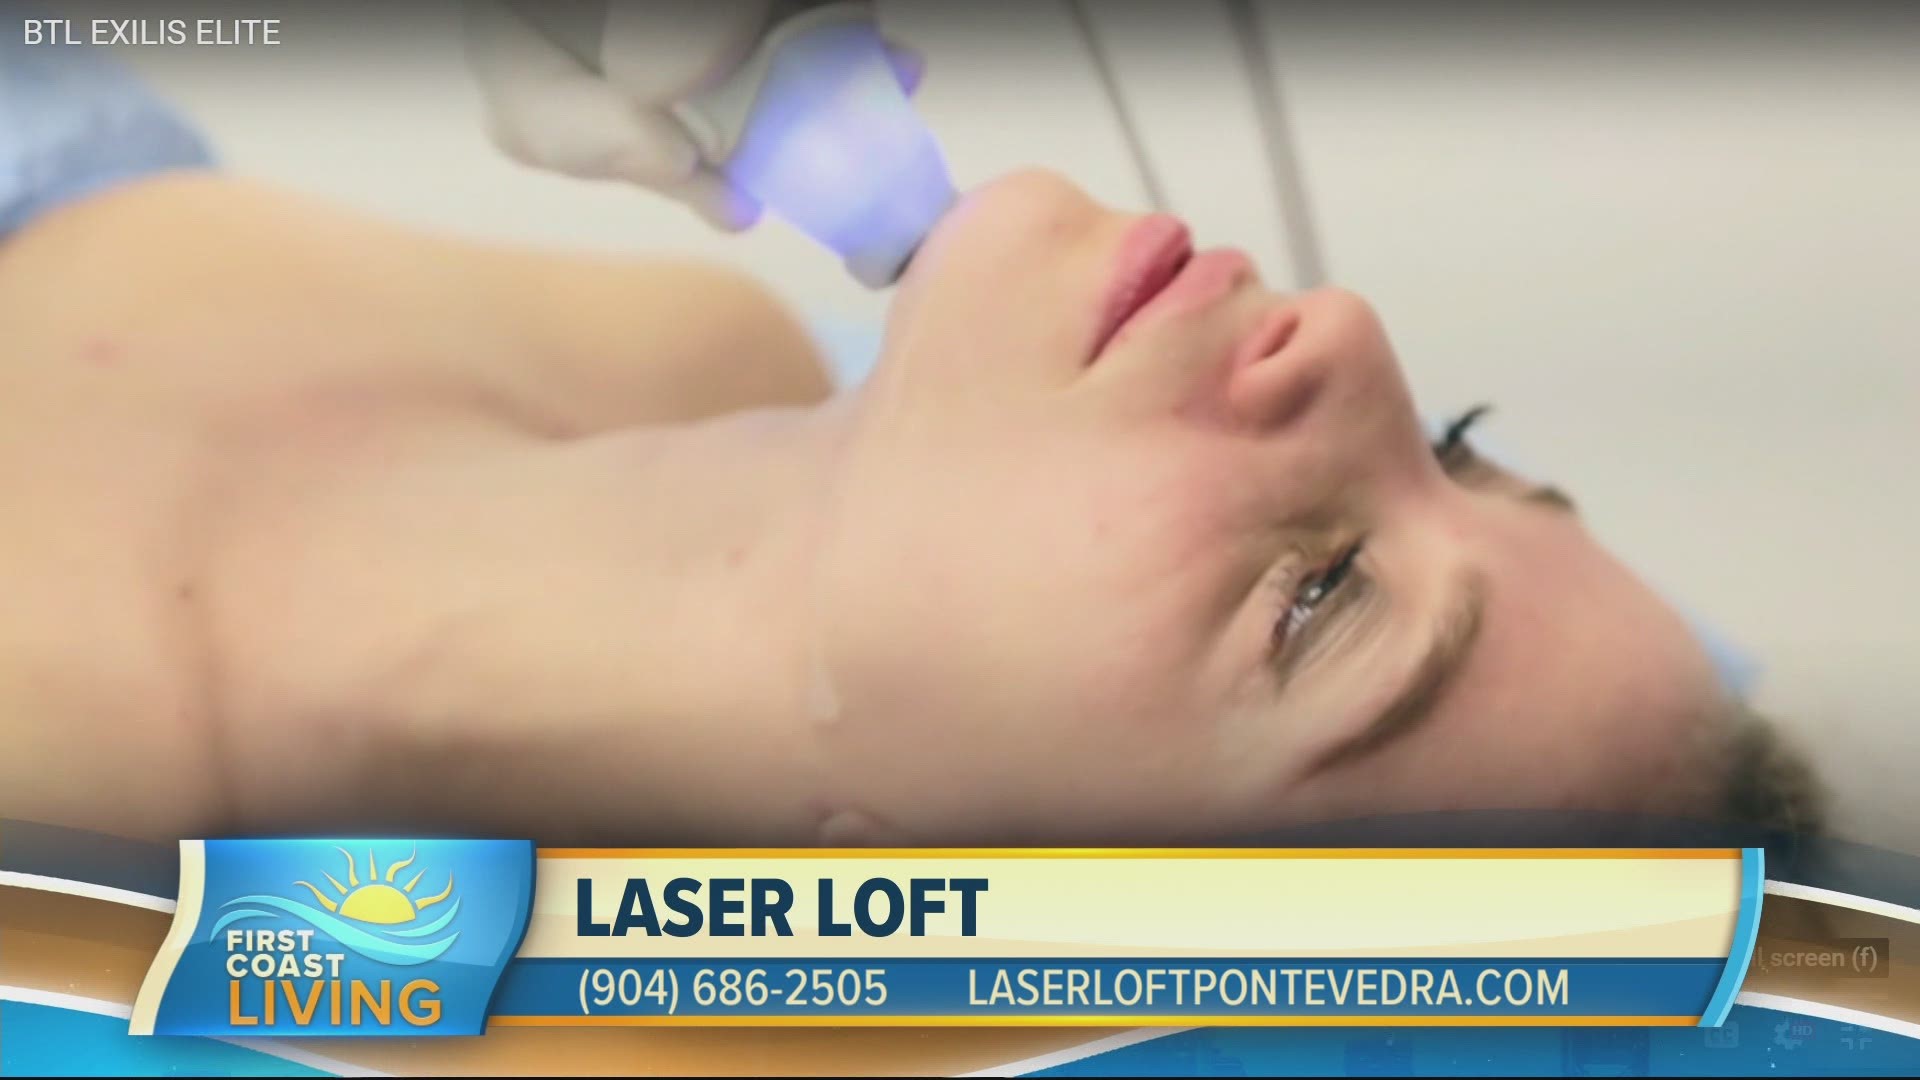 There comes a point in all our lives when we're a little bit insecure about our skin. Don't worry, though! Laser Loft is here to help.